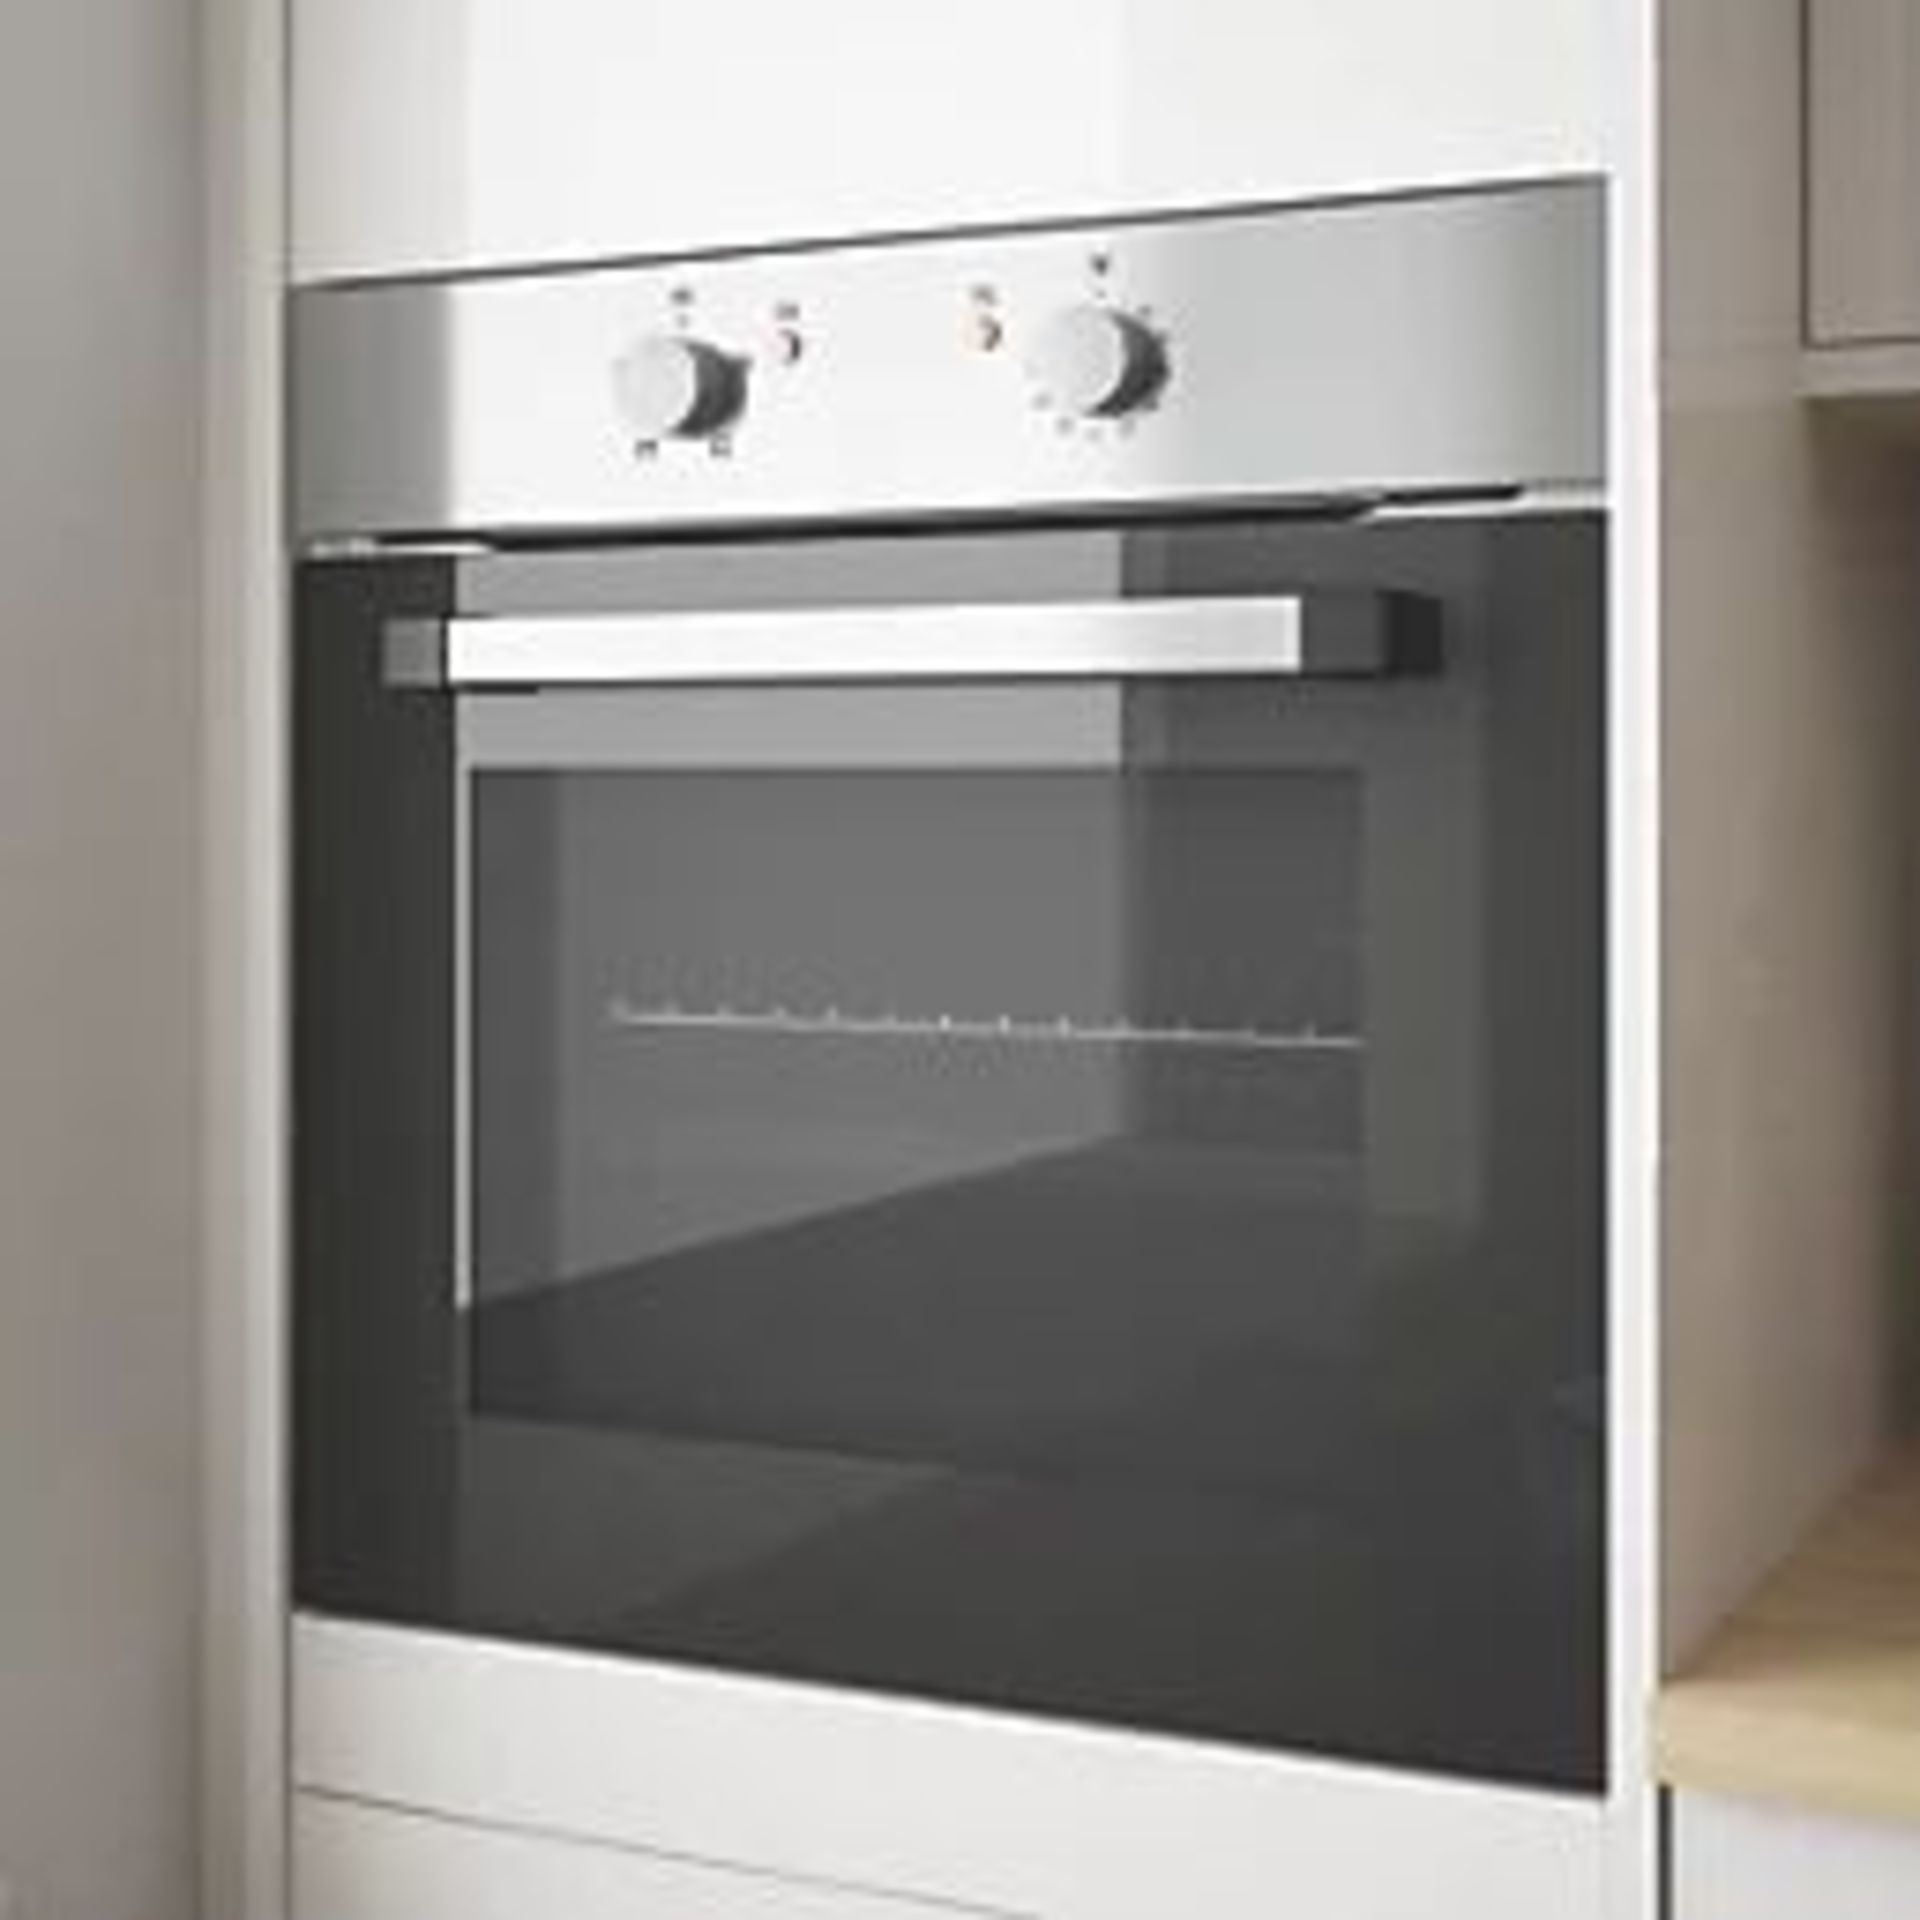 COOKE & LEWIS BUILT- IN SINGLE ELECTRIC OVEN STAINLESS STEEL 595MM X 595MM. - ER44. Conventional